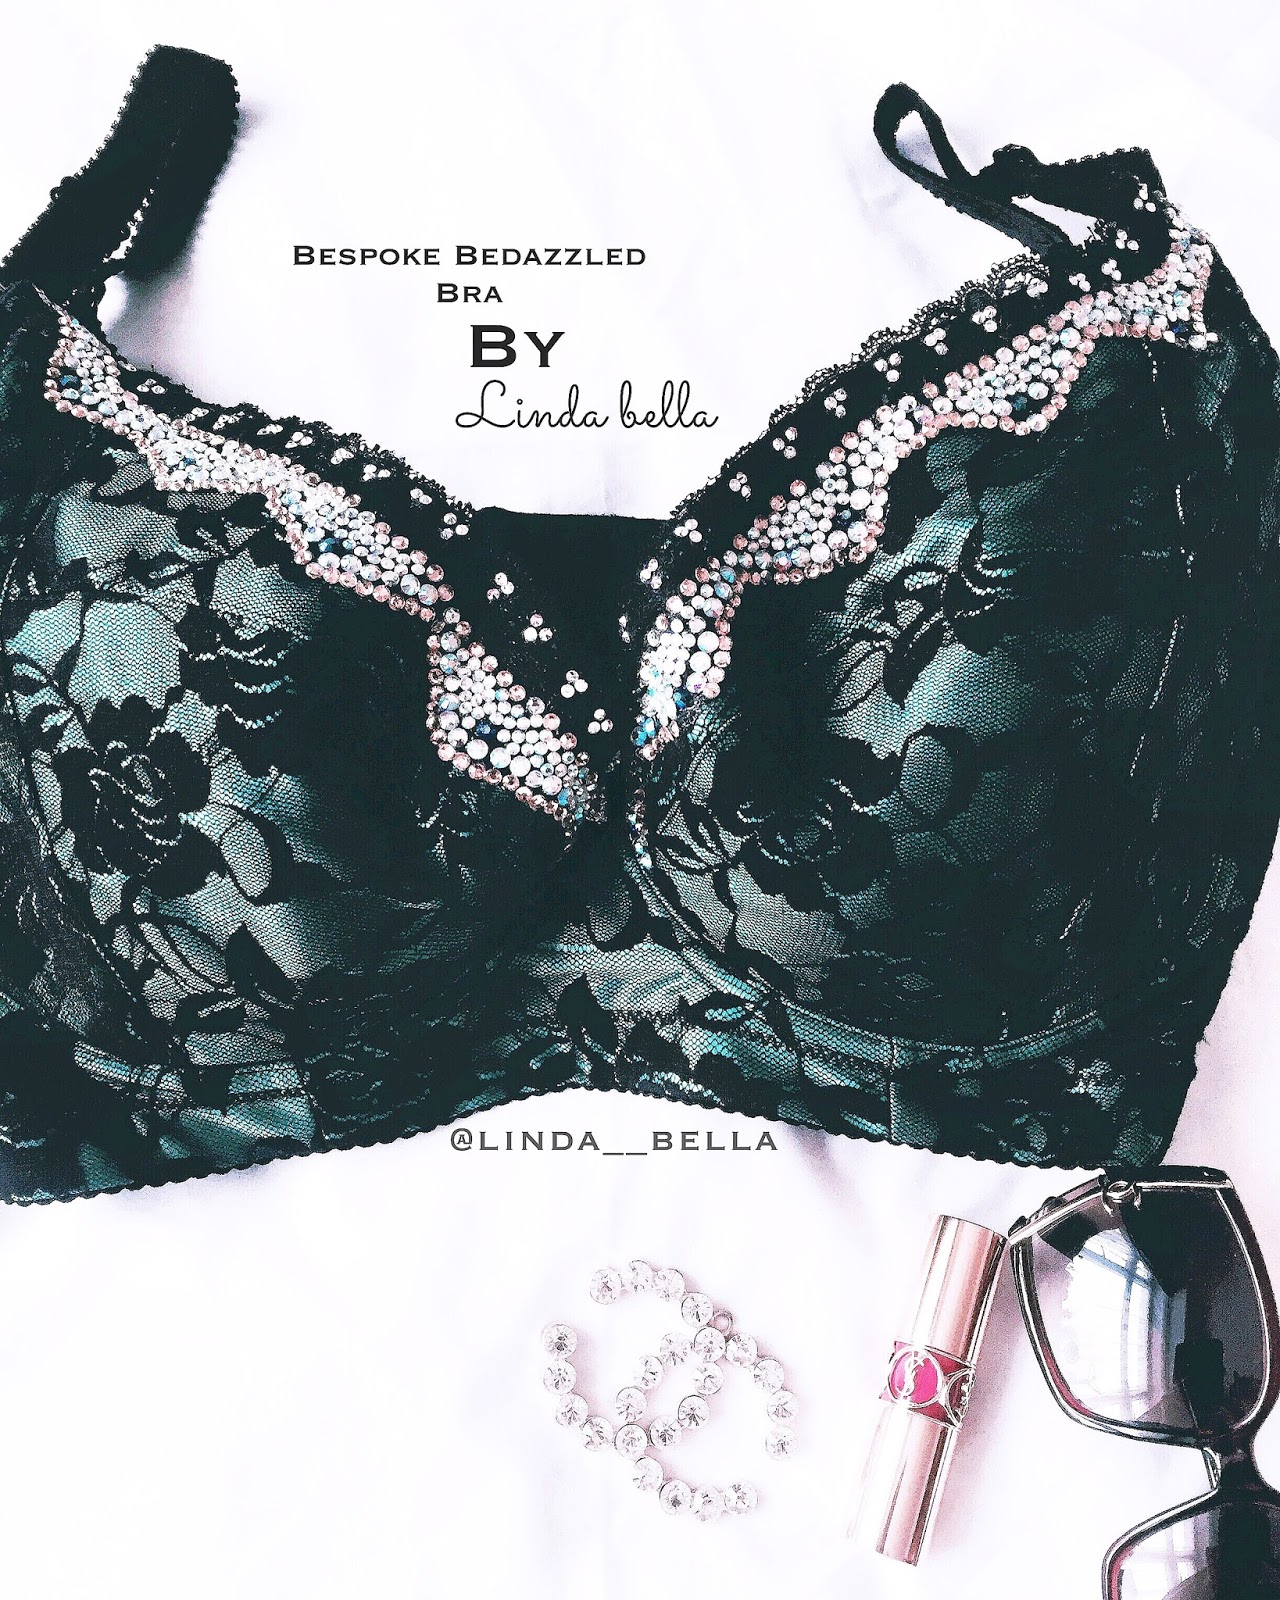 FASHION : Sneak Preview Of My Bespoke Bedazzled Bra Design